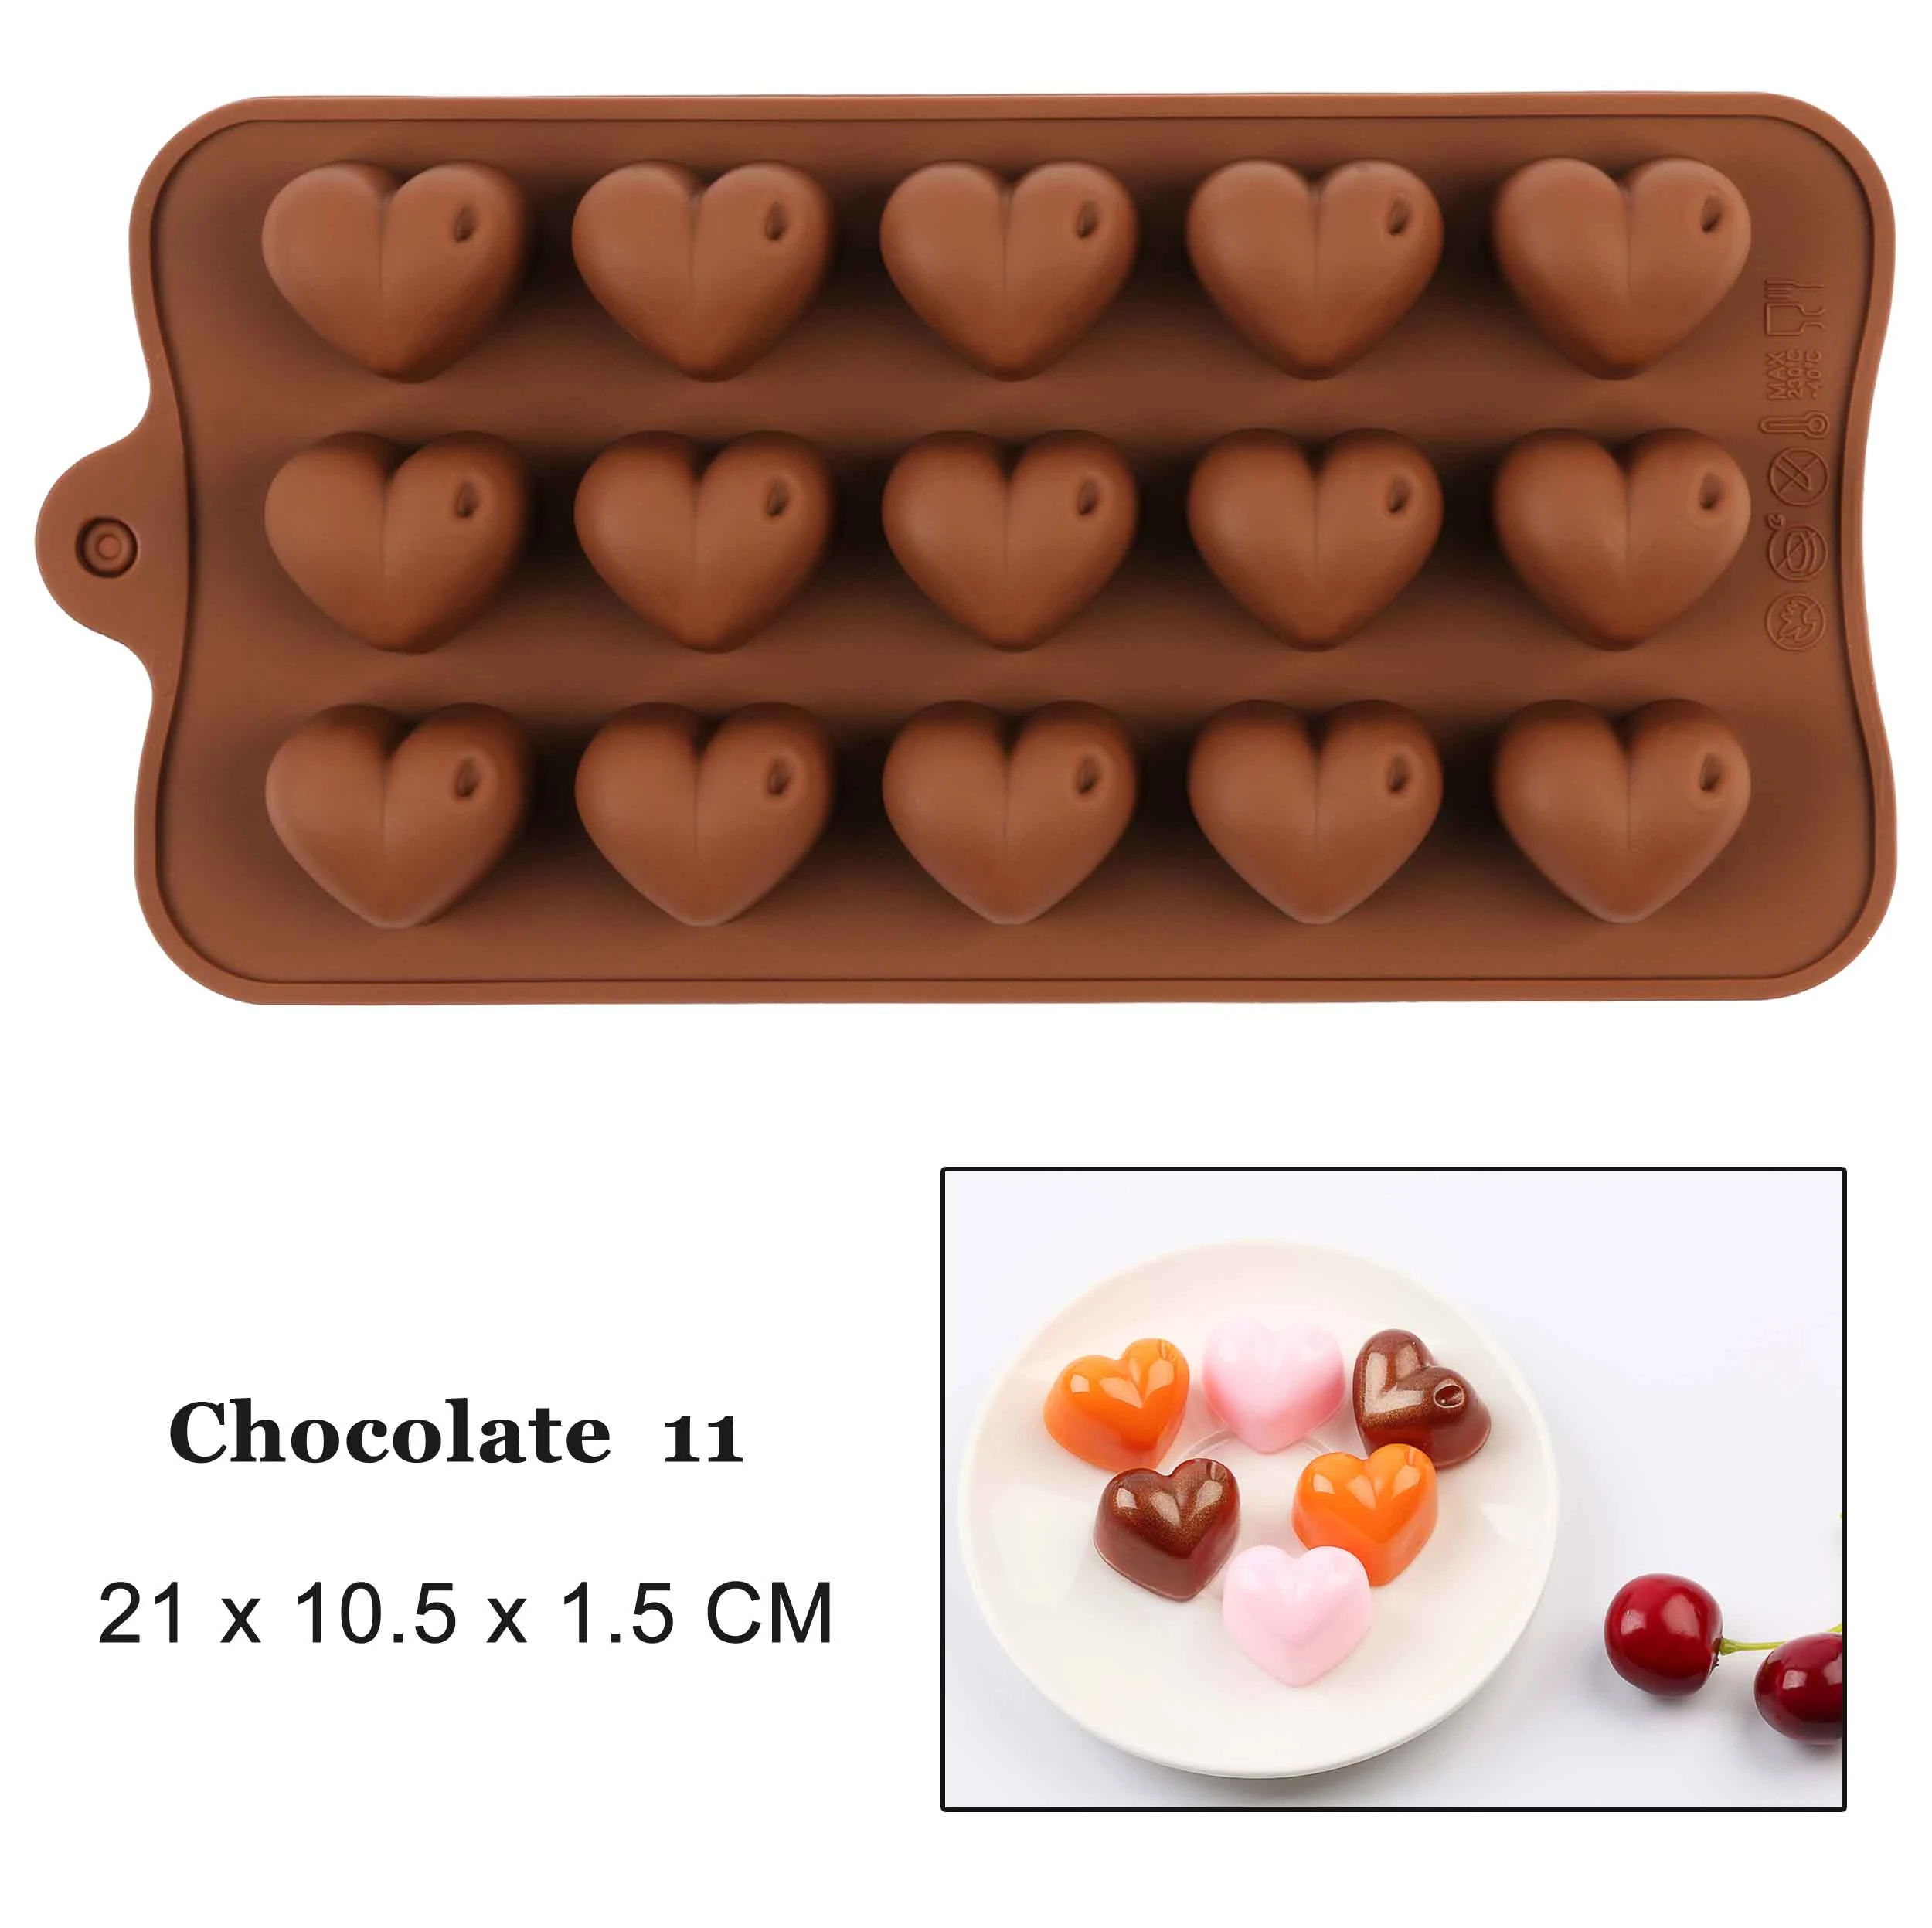 New Silicone Chocolate Mold 29 Shapes Chocolate baking Tools Non-stick Silicone cake mold Jelly and Candy Mold 3